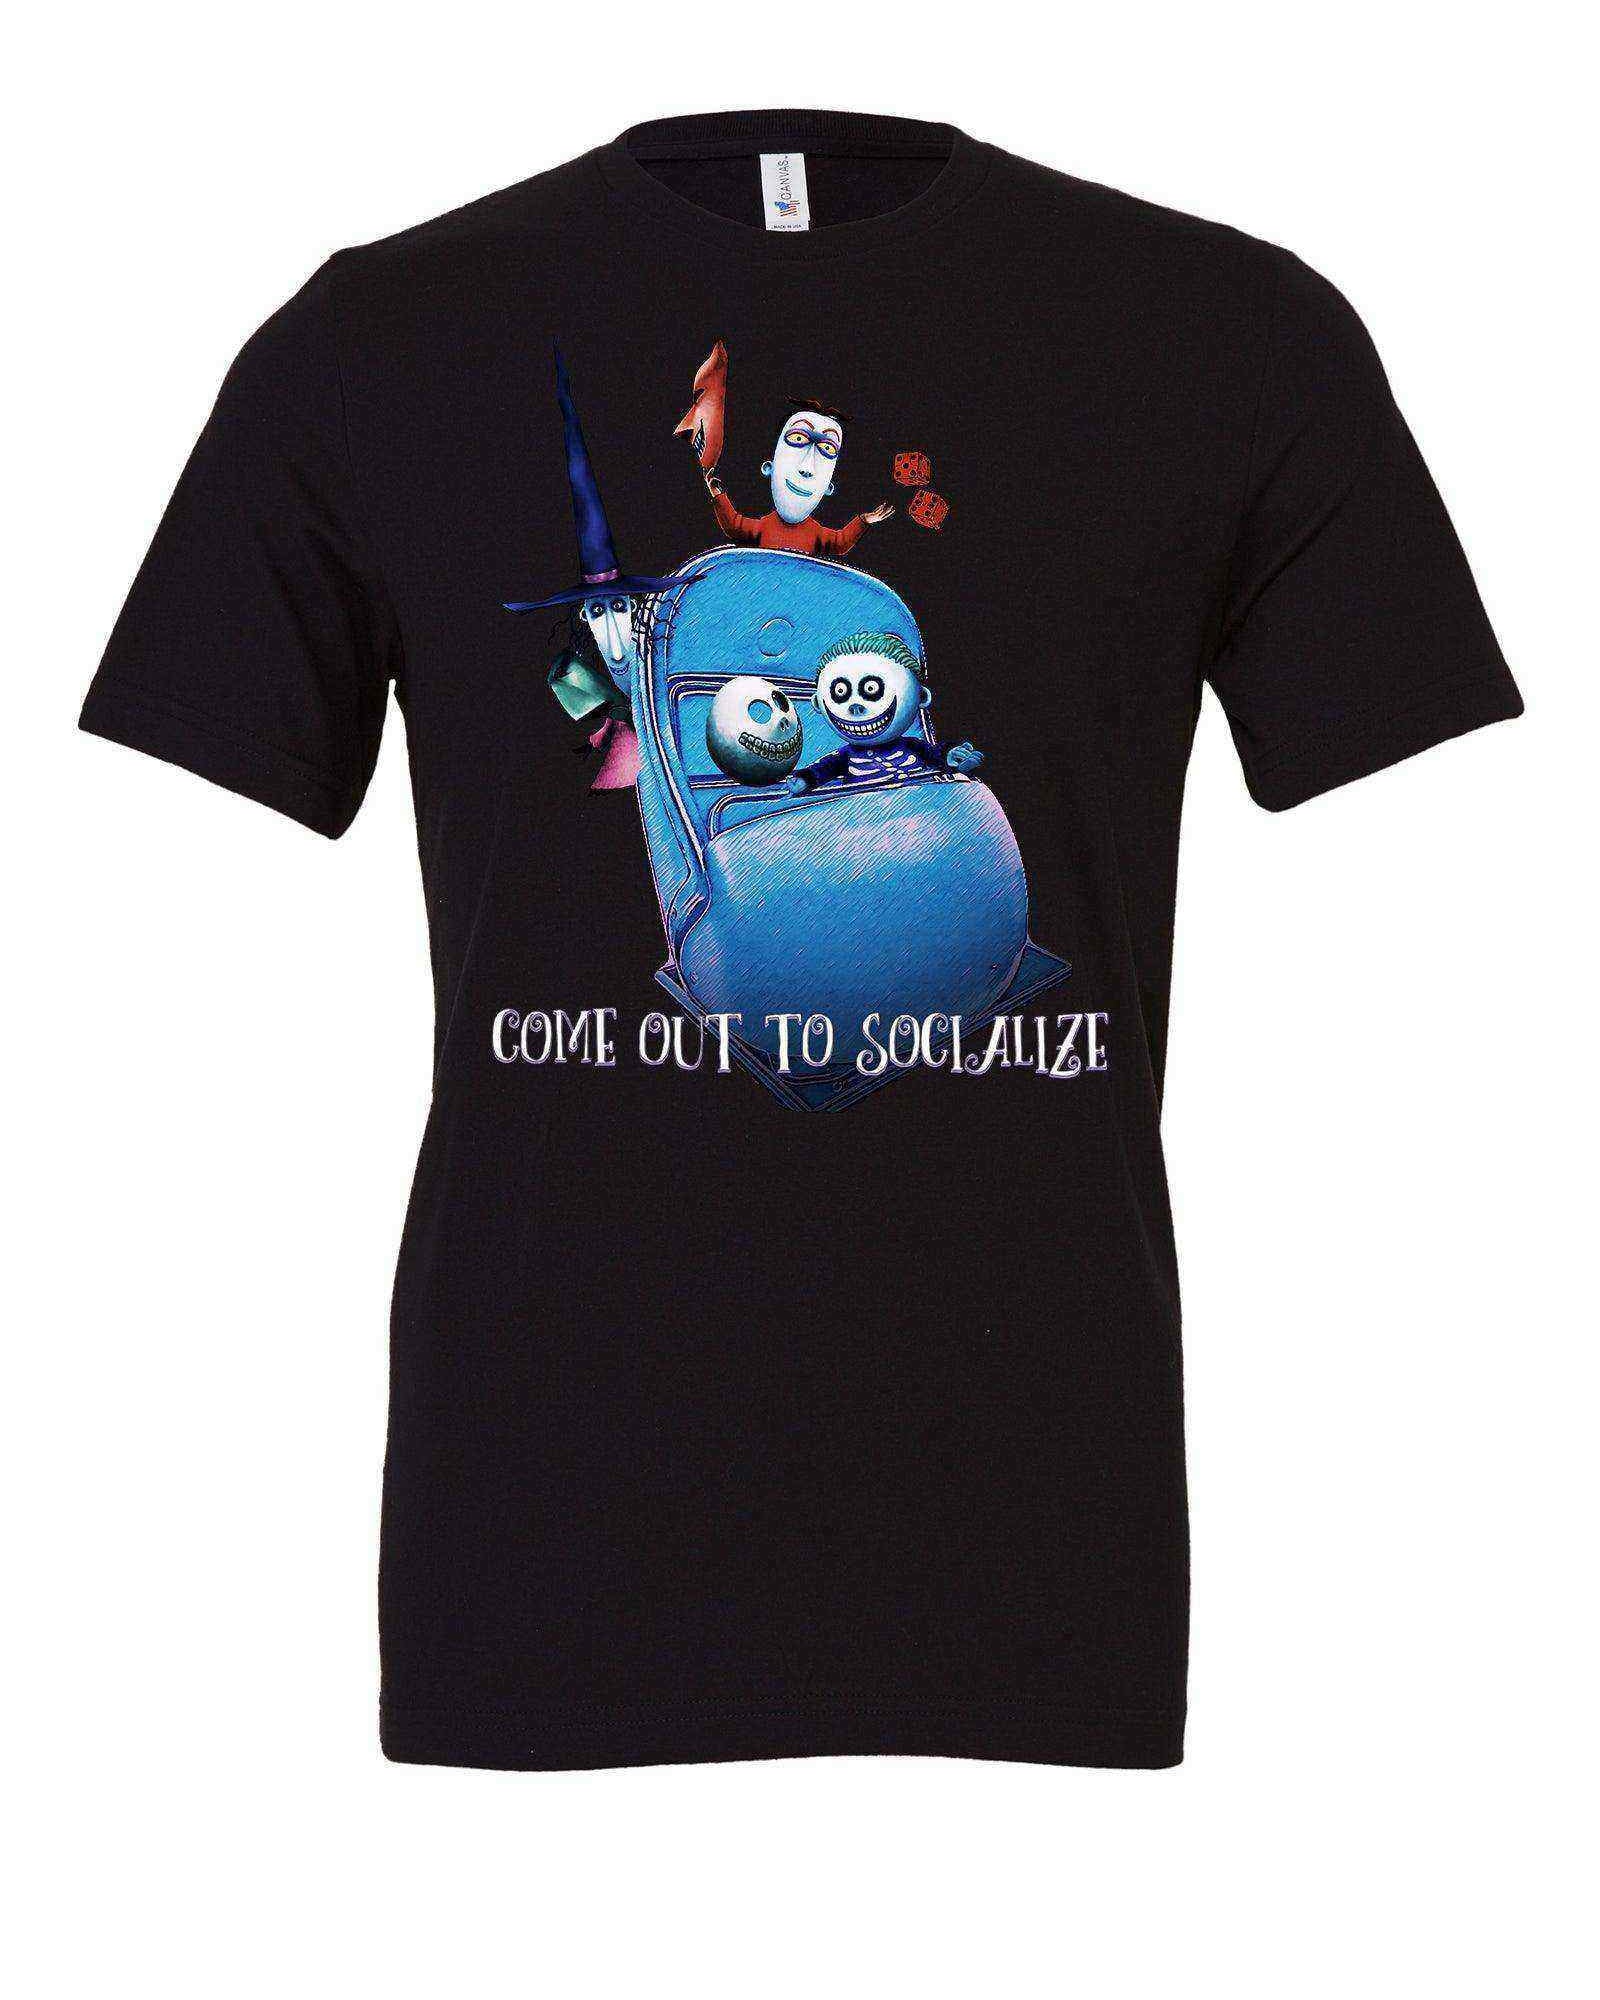 Toddler | Come Out To Socialize Shirt | The Haunted Mansion | Nightmare Before Christmas - Dylan's Tees